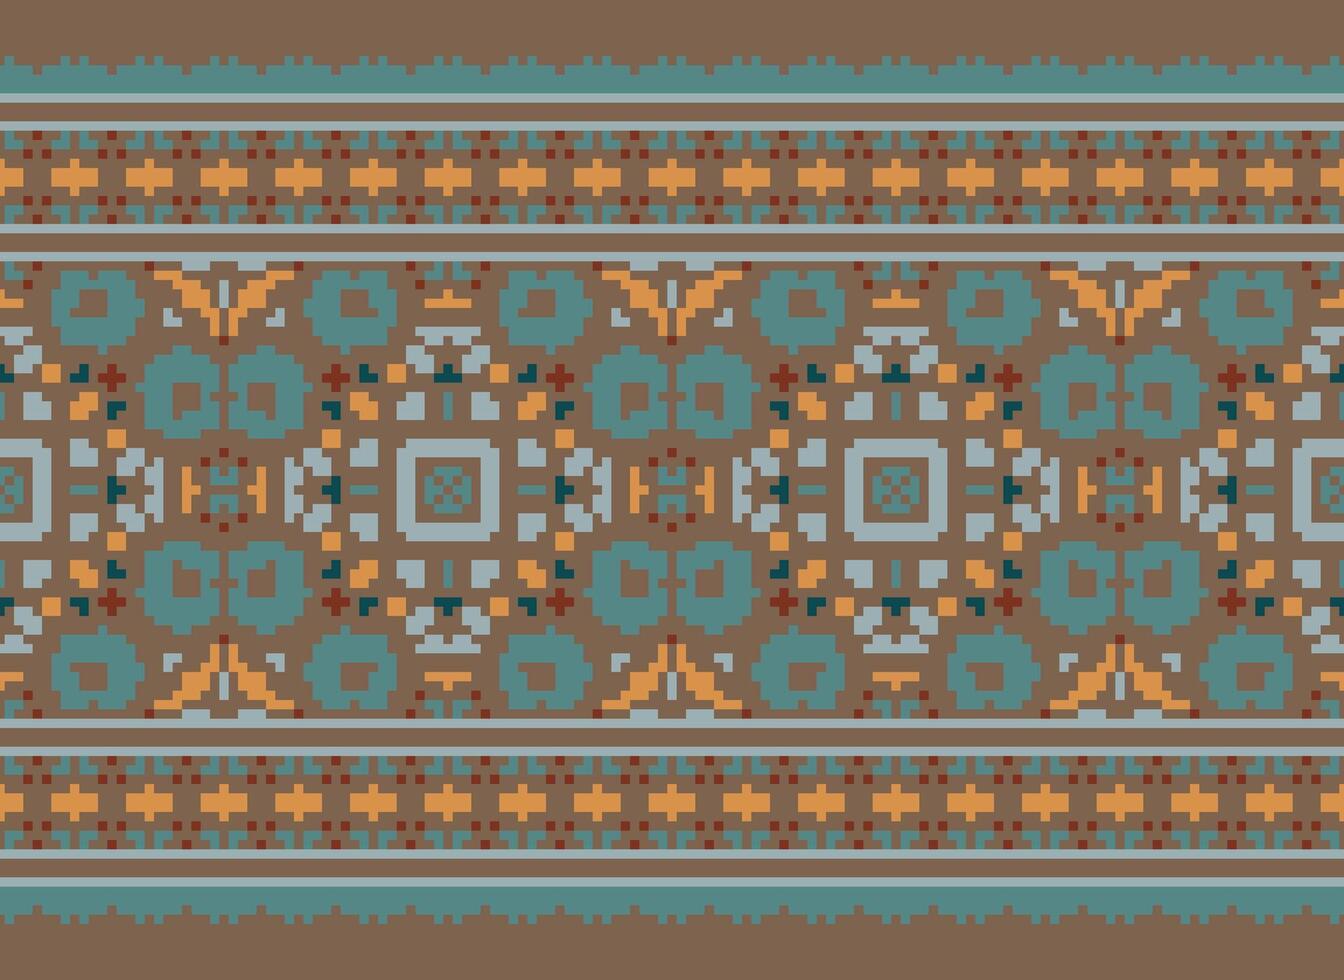 Pixel Embroidery ethnic pattern, Vector Geometric ornate background, Cross stitch retro zigzag style, pattern knitting continuous, Design for textile, fabric, ceramic, digital print